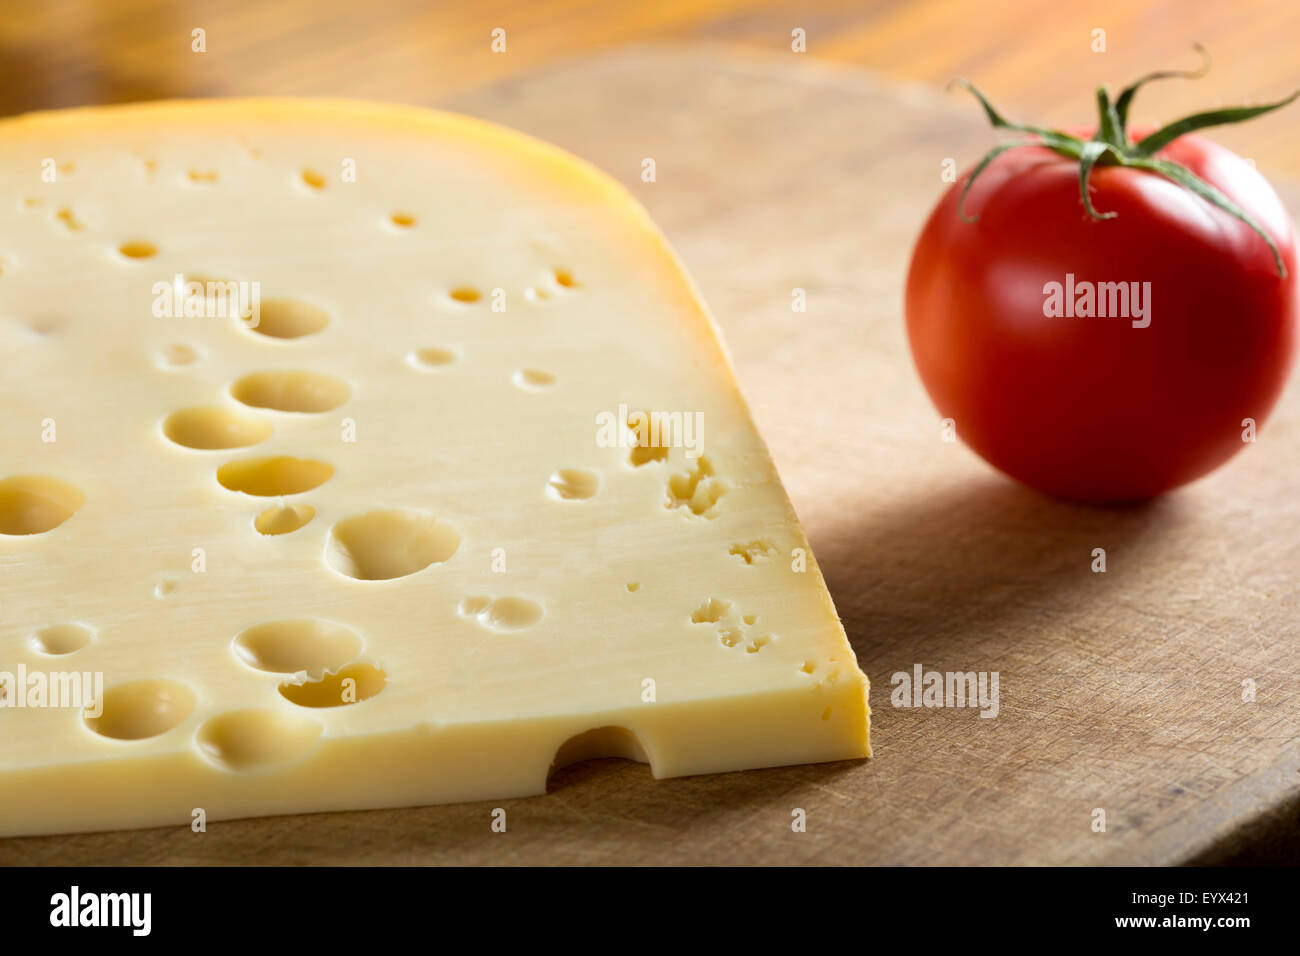 Swiss Emmental Cheese and tomato over wood background Stock Photo